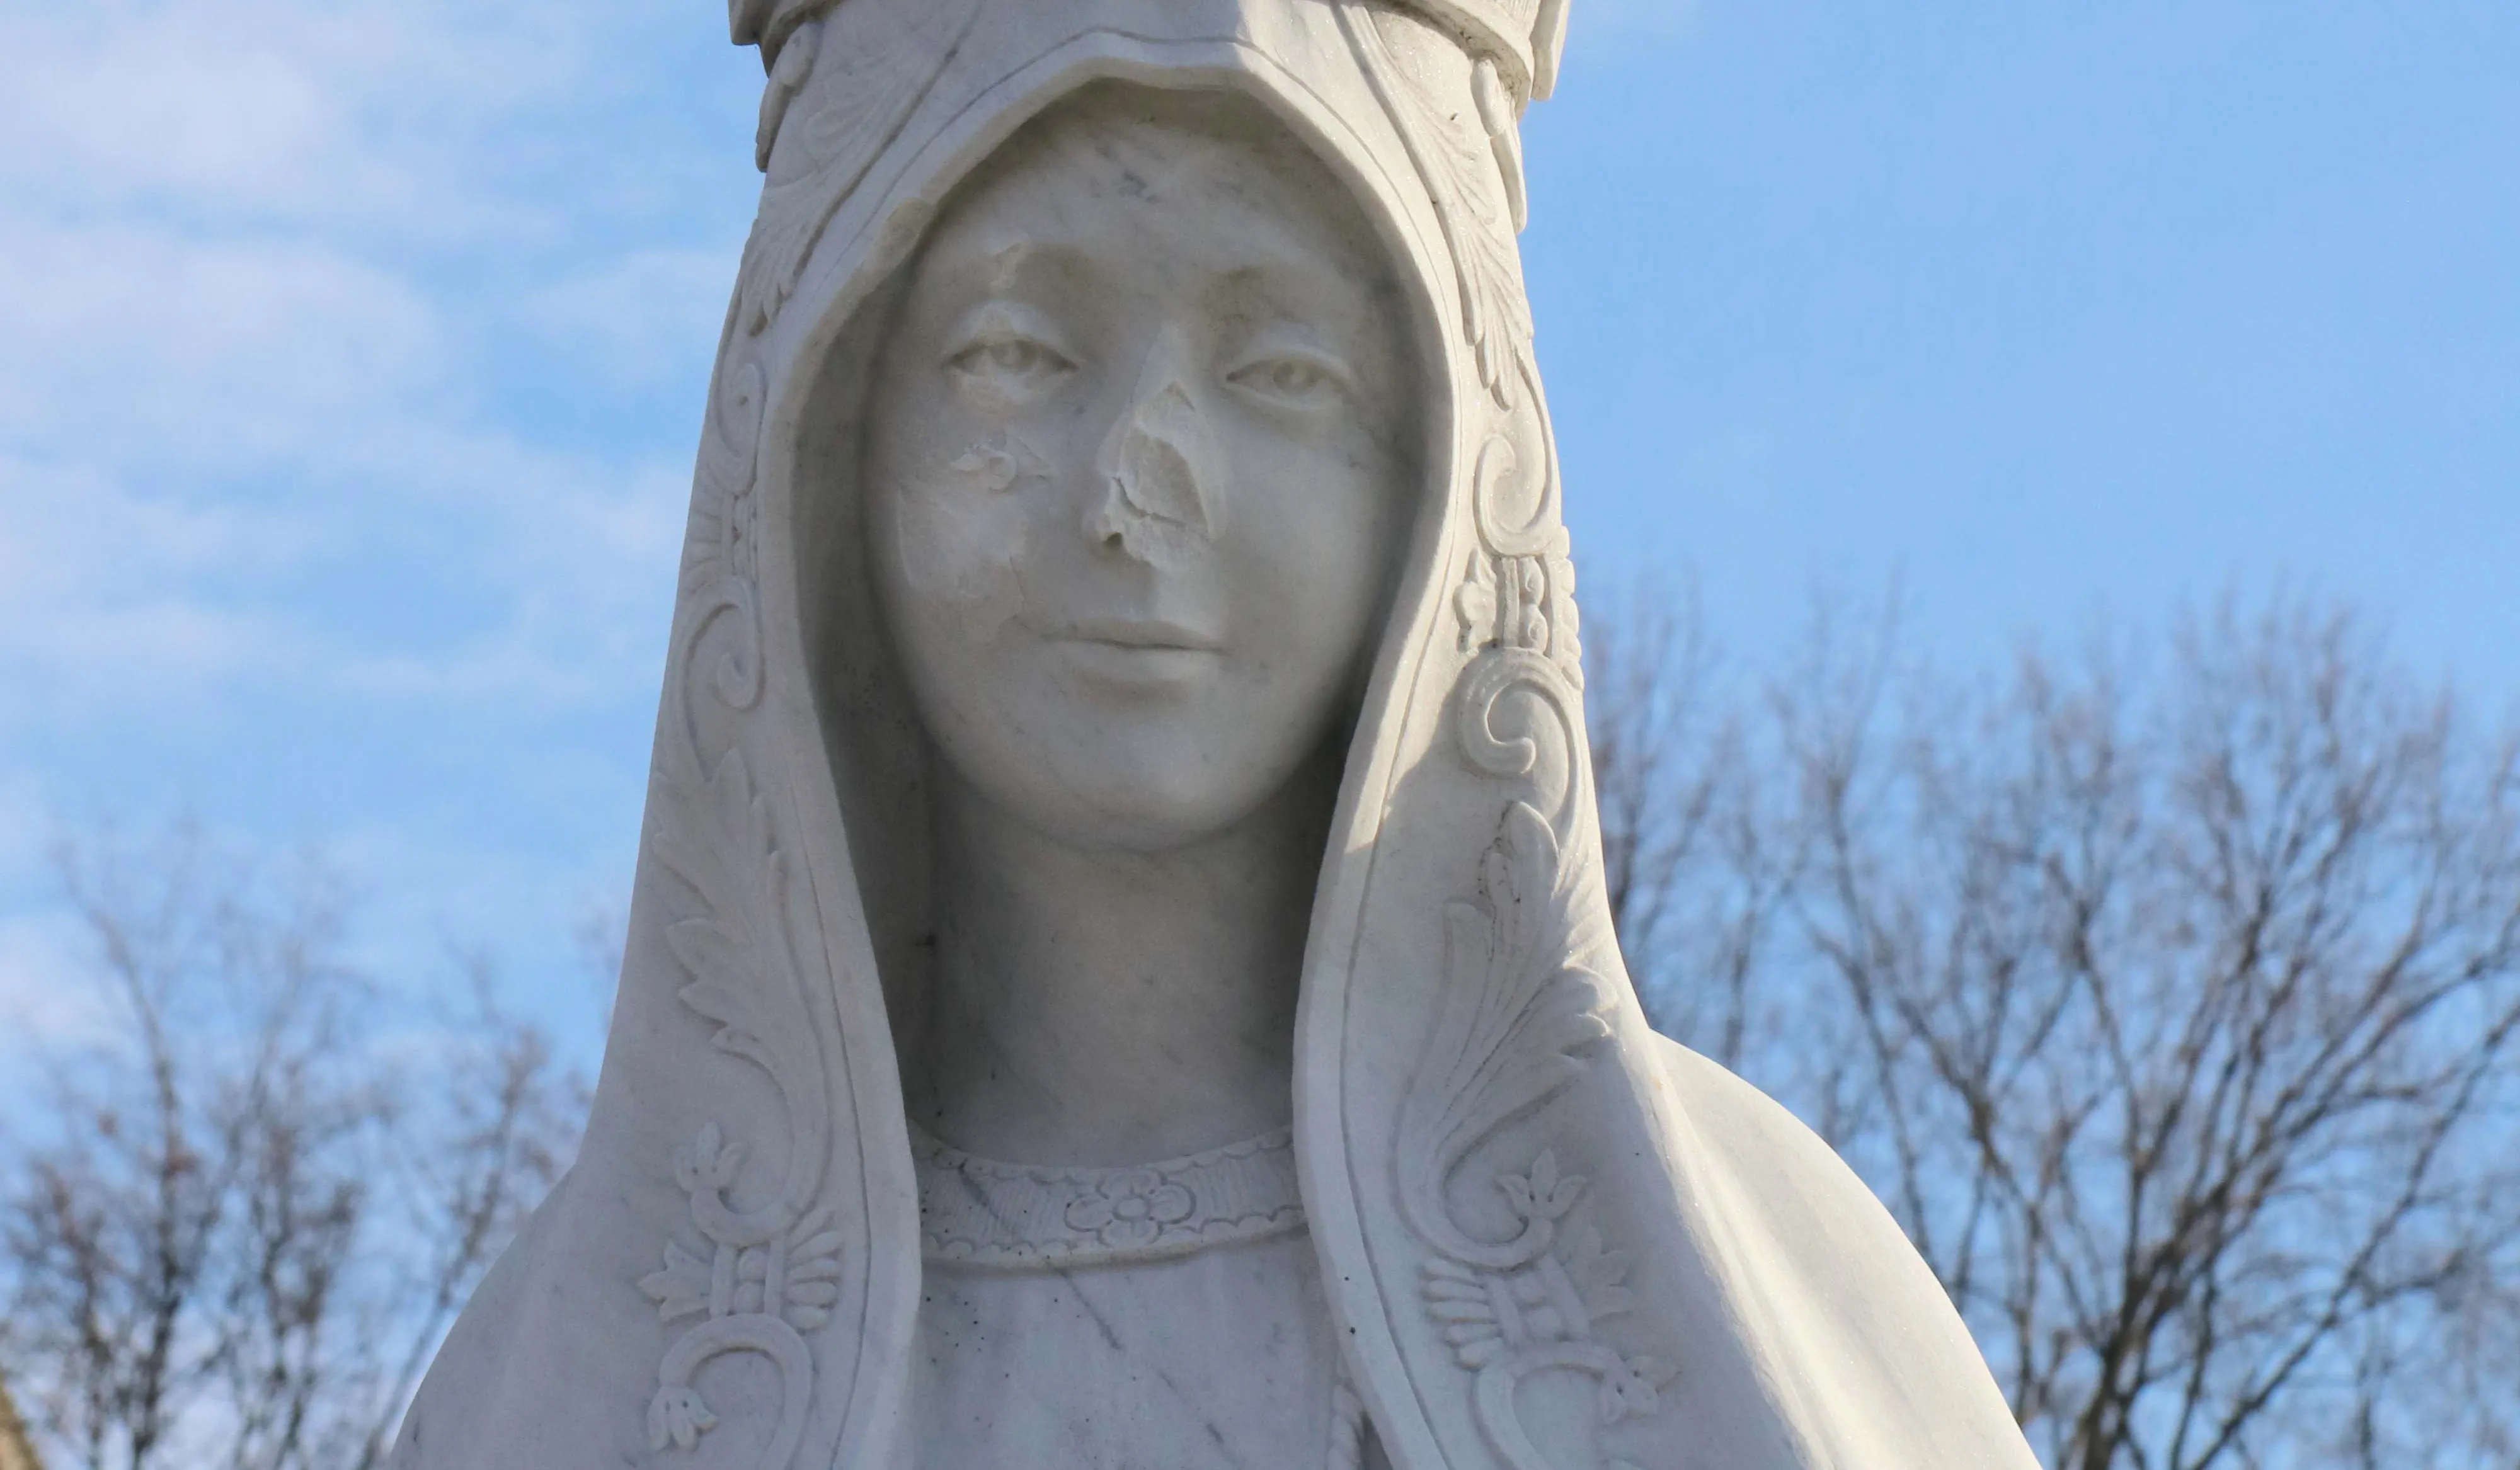 Security personnel reported damage to the Our Lady of Fatima statue located outside the Basilica of the National Shrine of the Immaculate Conception in Washington, D.C., Dec. 6, 2021.?w=200&h=150